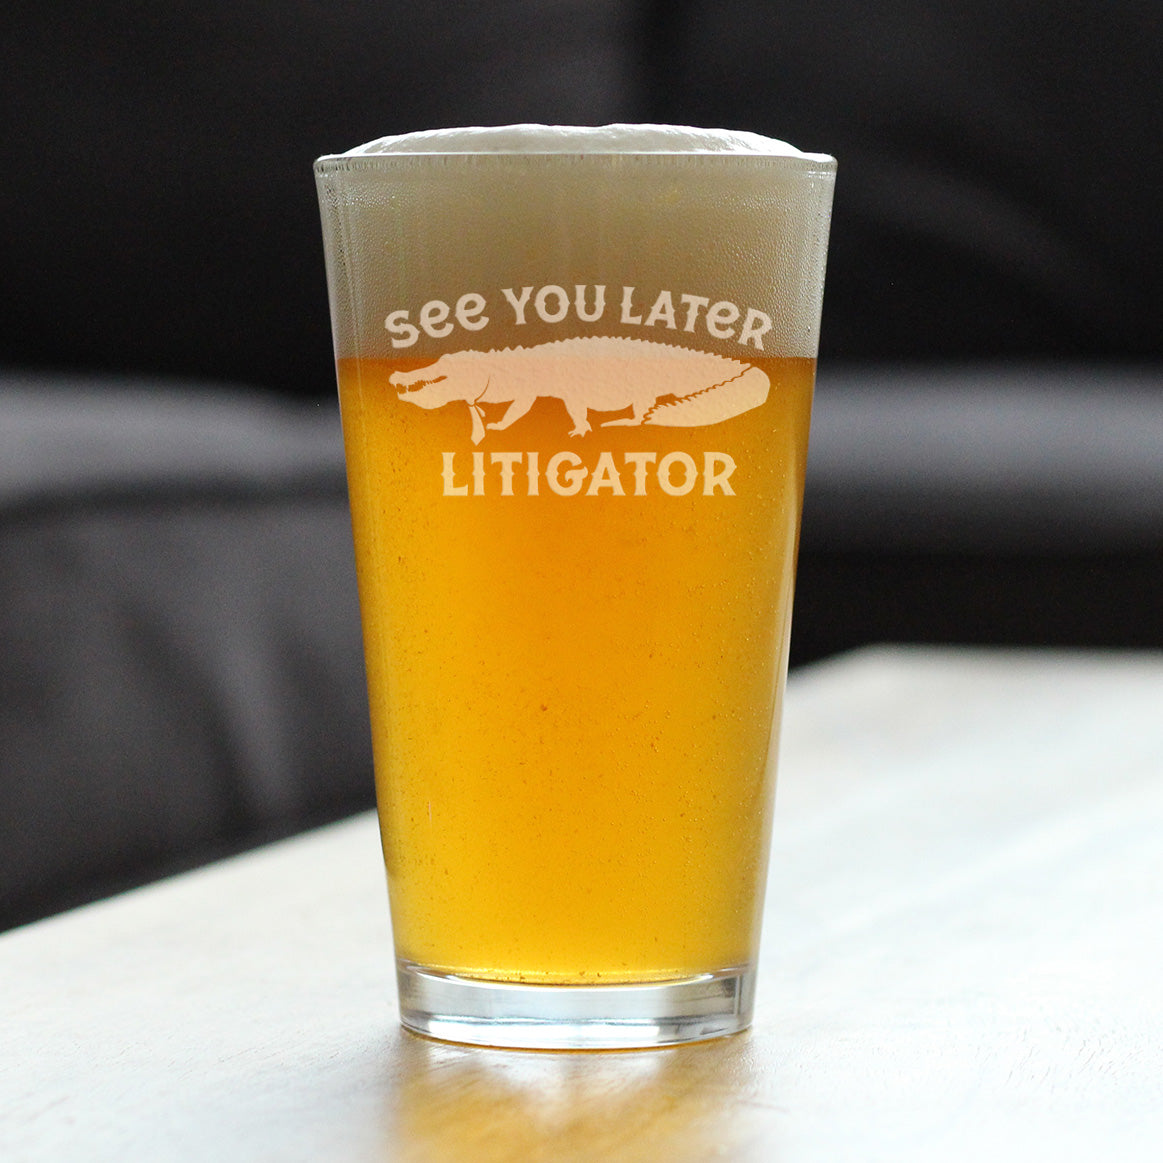 See You Later Litigator - Pint Glass for Beer - Funny Lawyer Gifts for Law School Graduates - 16 oz Glass